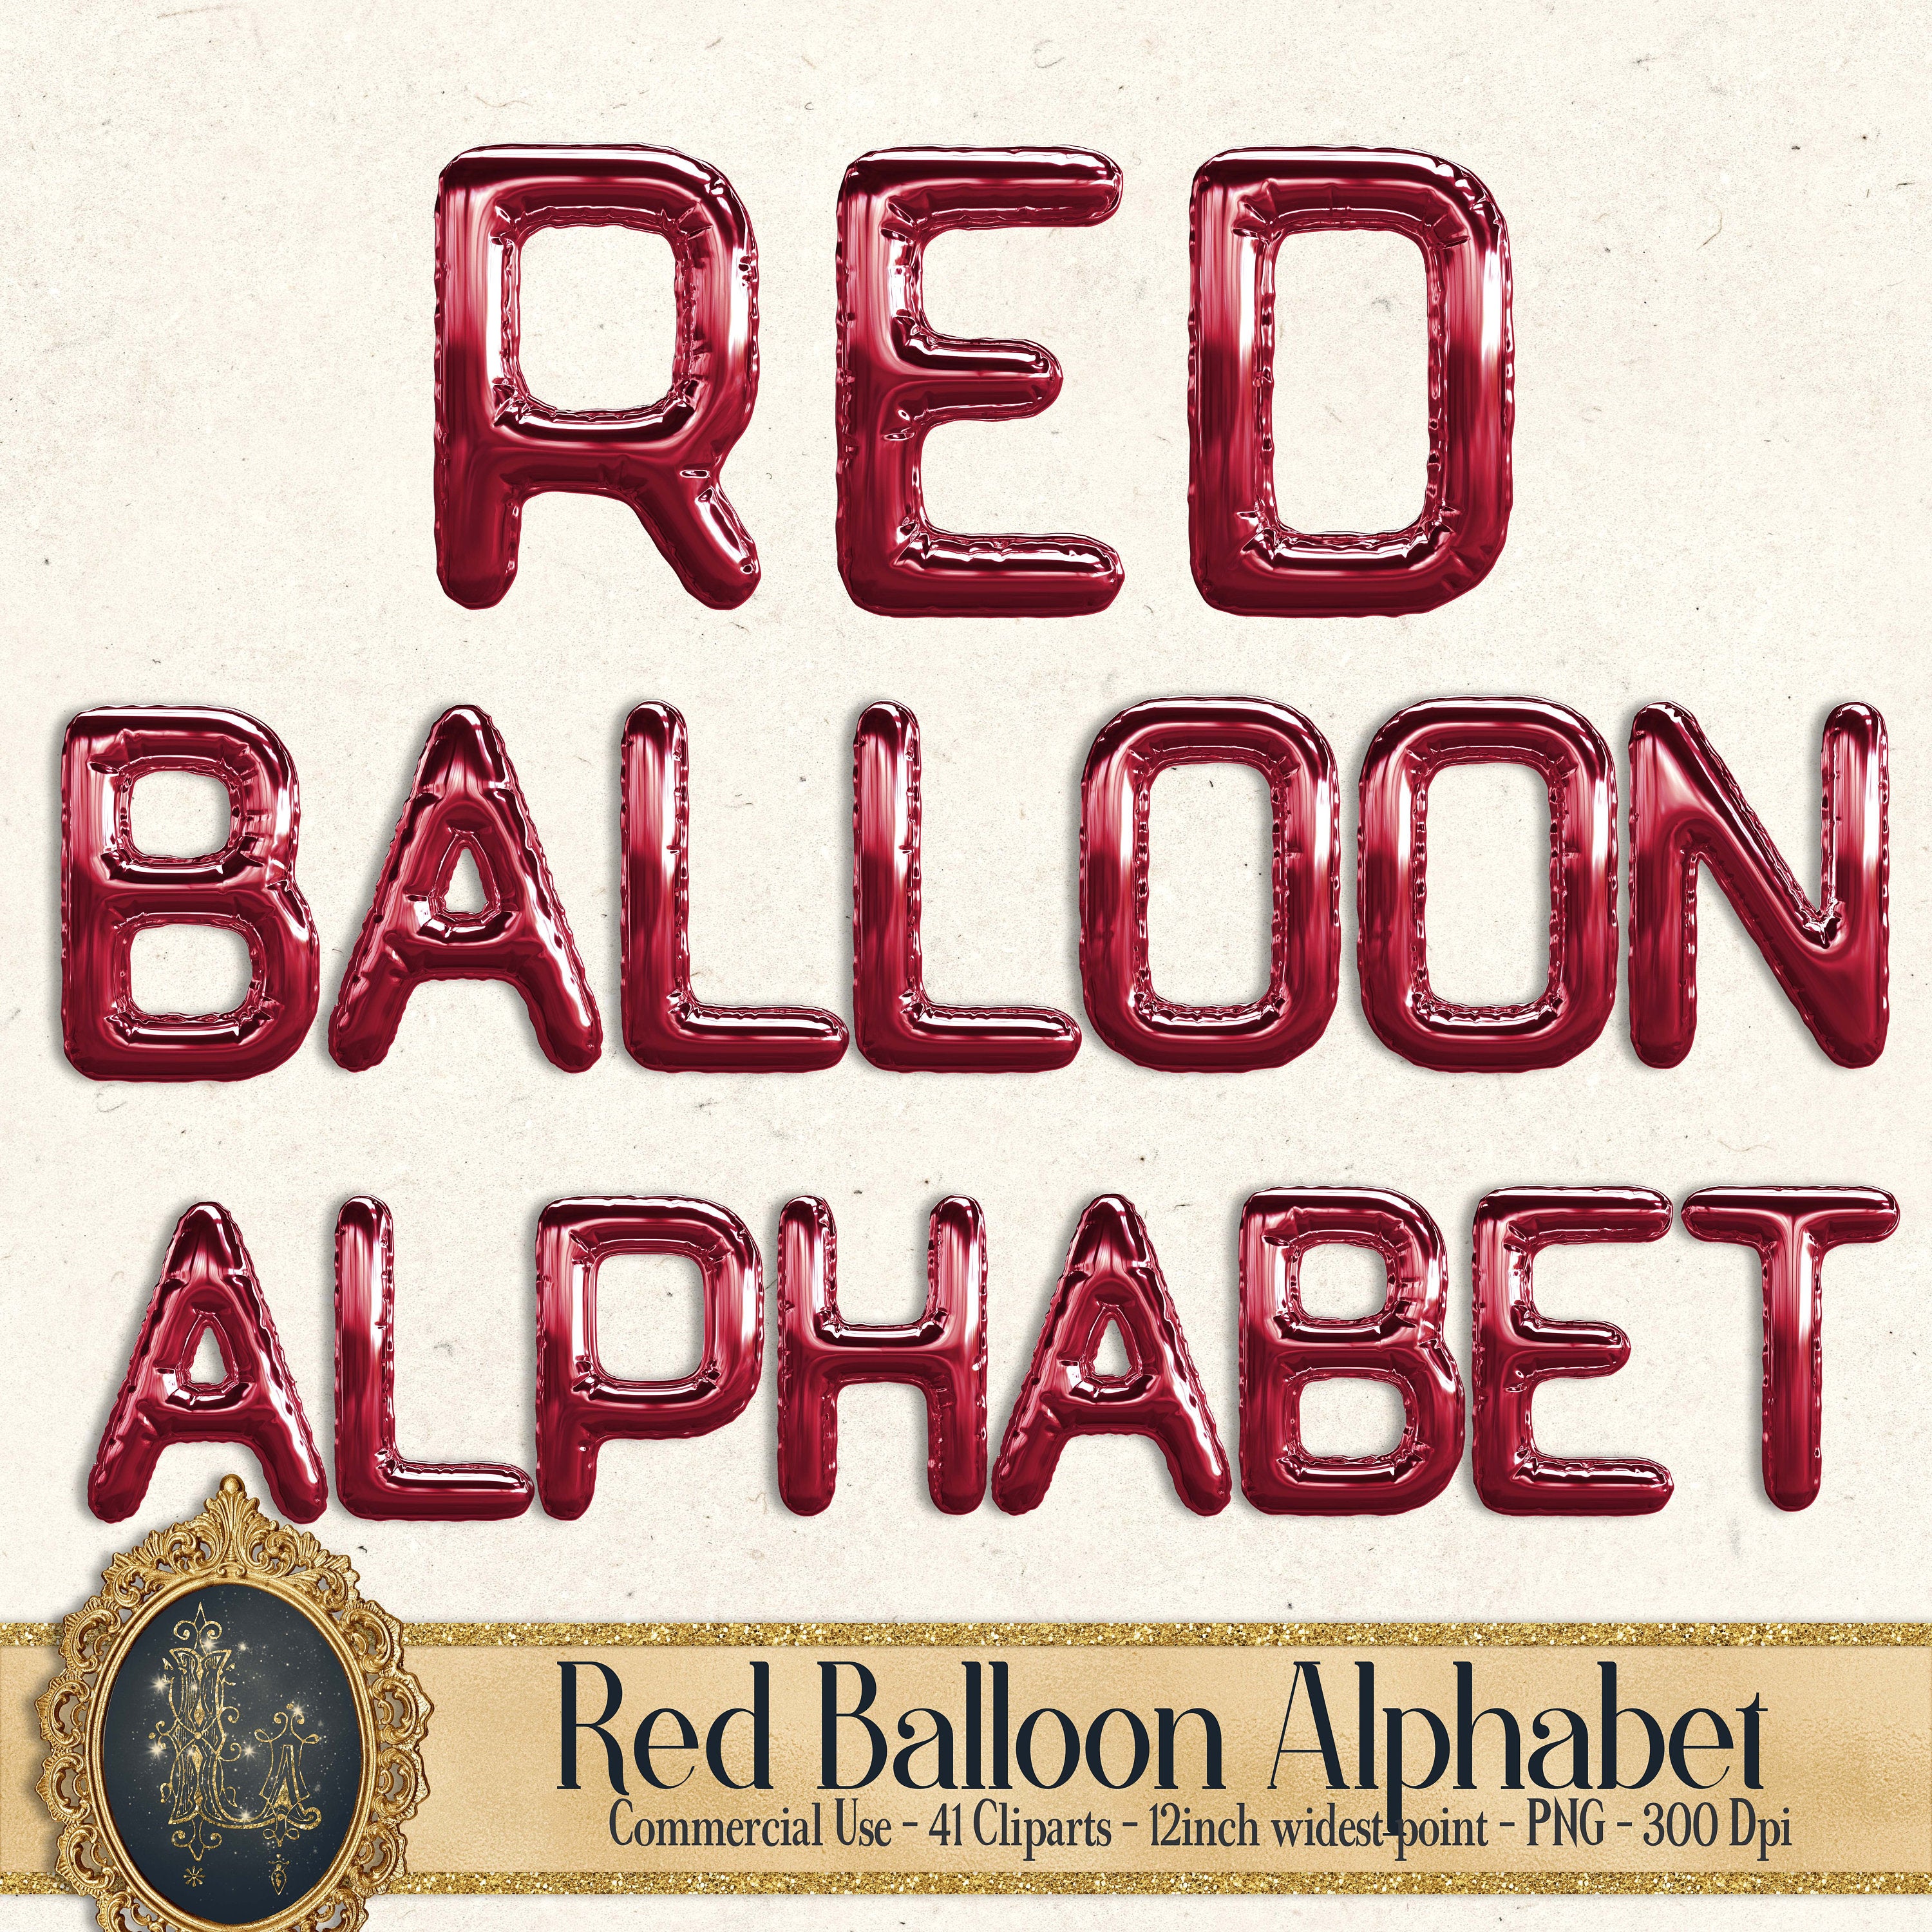 Red Balloon Alphabet 41 Cliparts, 300 Dpi Planner Paper, Commercial Use, Scrapbook Paper, Digital Red Valentine Alphabet, Red Balloon